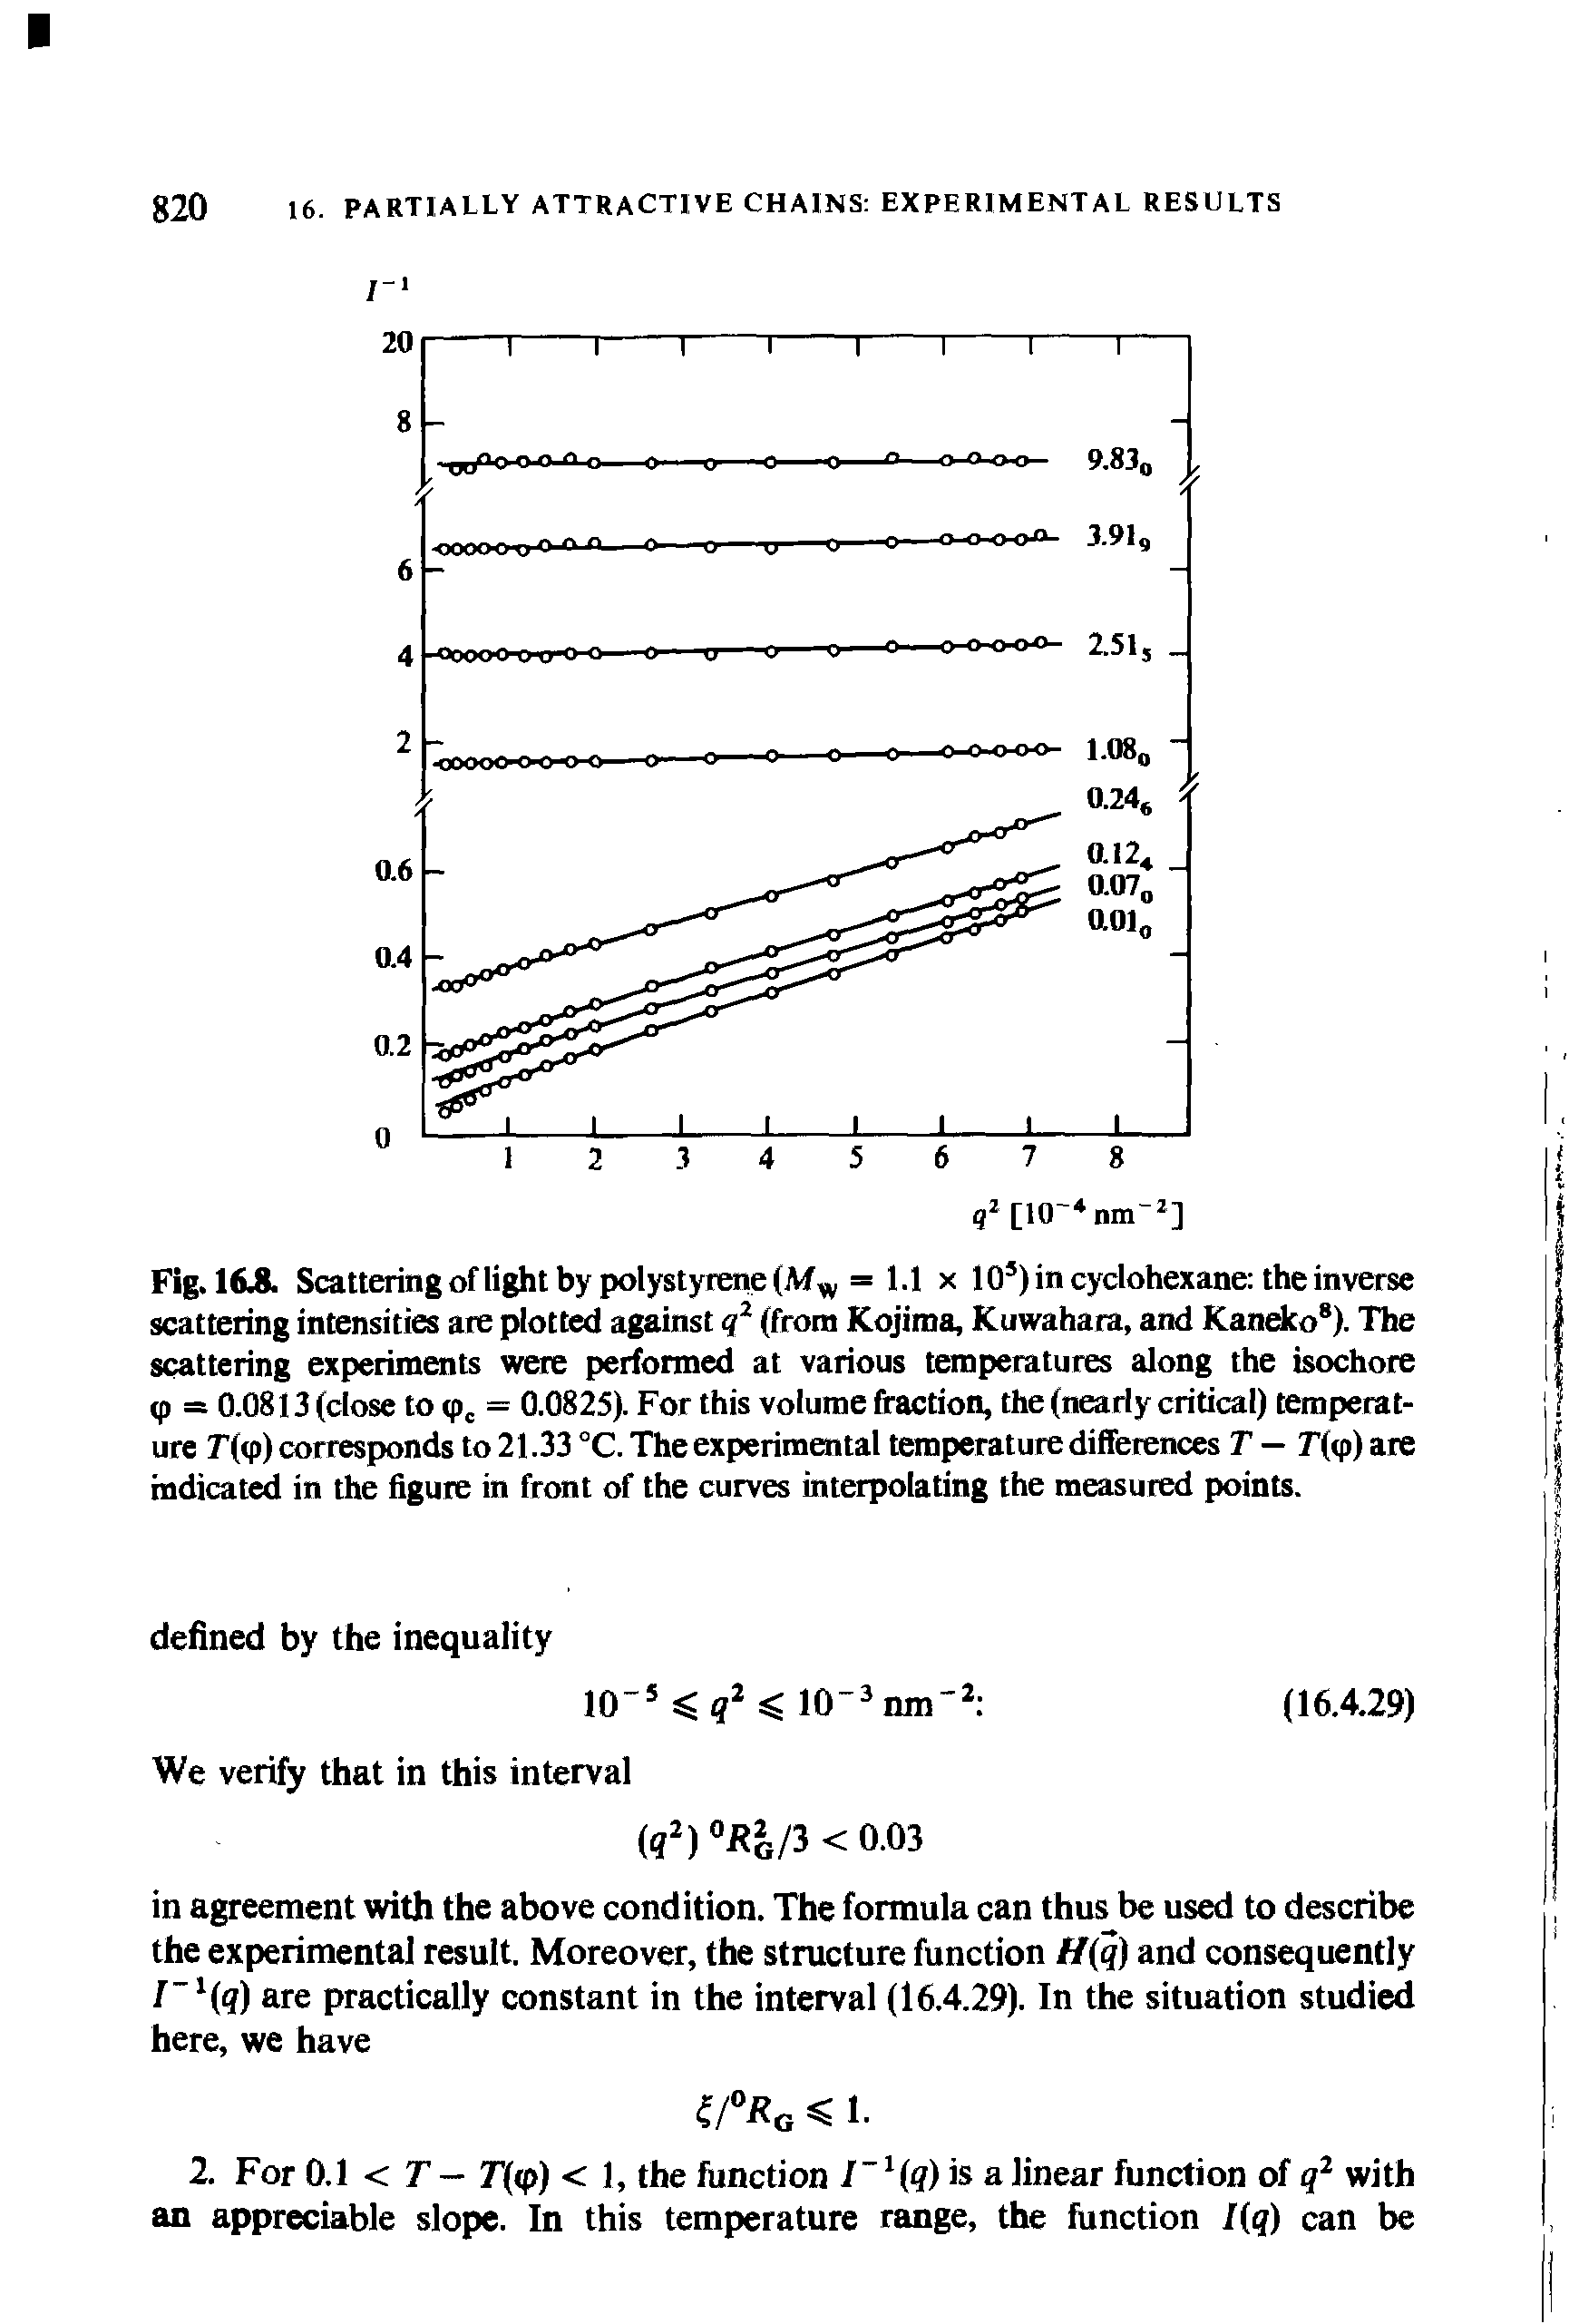 Fig. 1 8. Scattering of light by polystyrene (Mw = 1.1 x 105) in cyclohexane the inverse scattering intensities are plotted against q2 (from Kojima, Kuwahara, and Kaneko8). The scattering experiments were performed at various temperatures along the isochore (p = 0.0813 (close to (pc = 0.0825). For this volume fraction, the (nearly critical) temperature T(<p) corresponds to 21.33 °C. The experimental temperature differences T — T((p) are indicated in the figure in front of the curves interpolating the measured points.